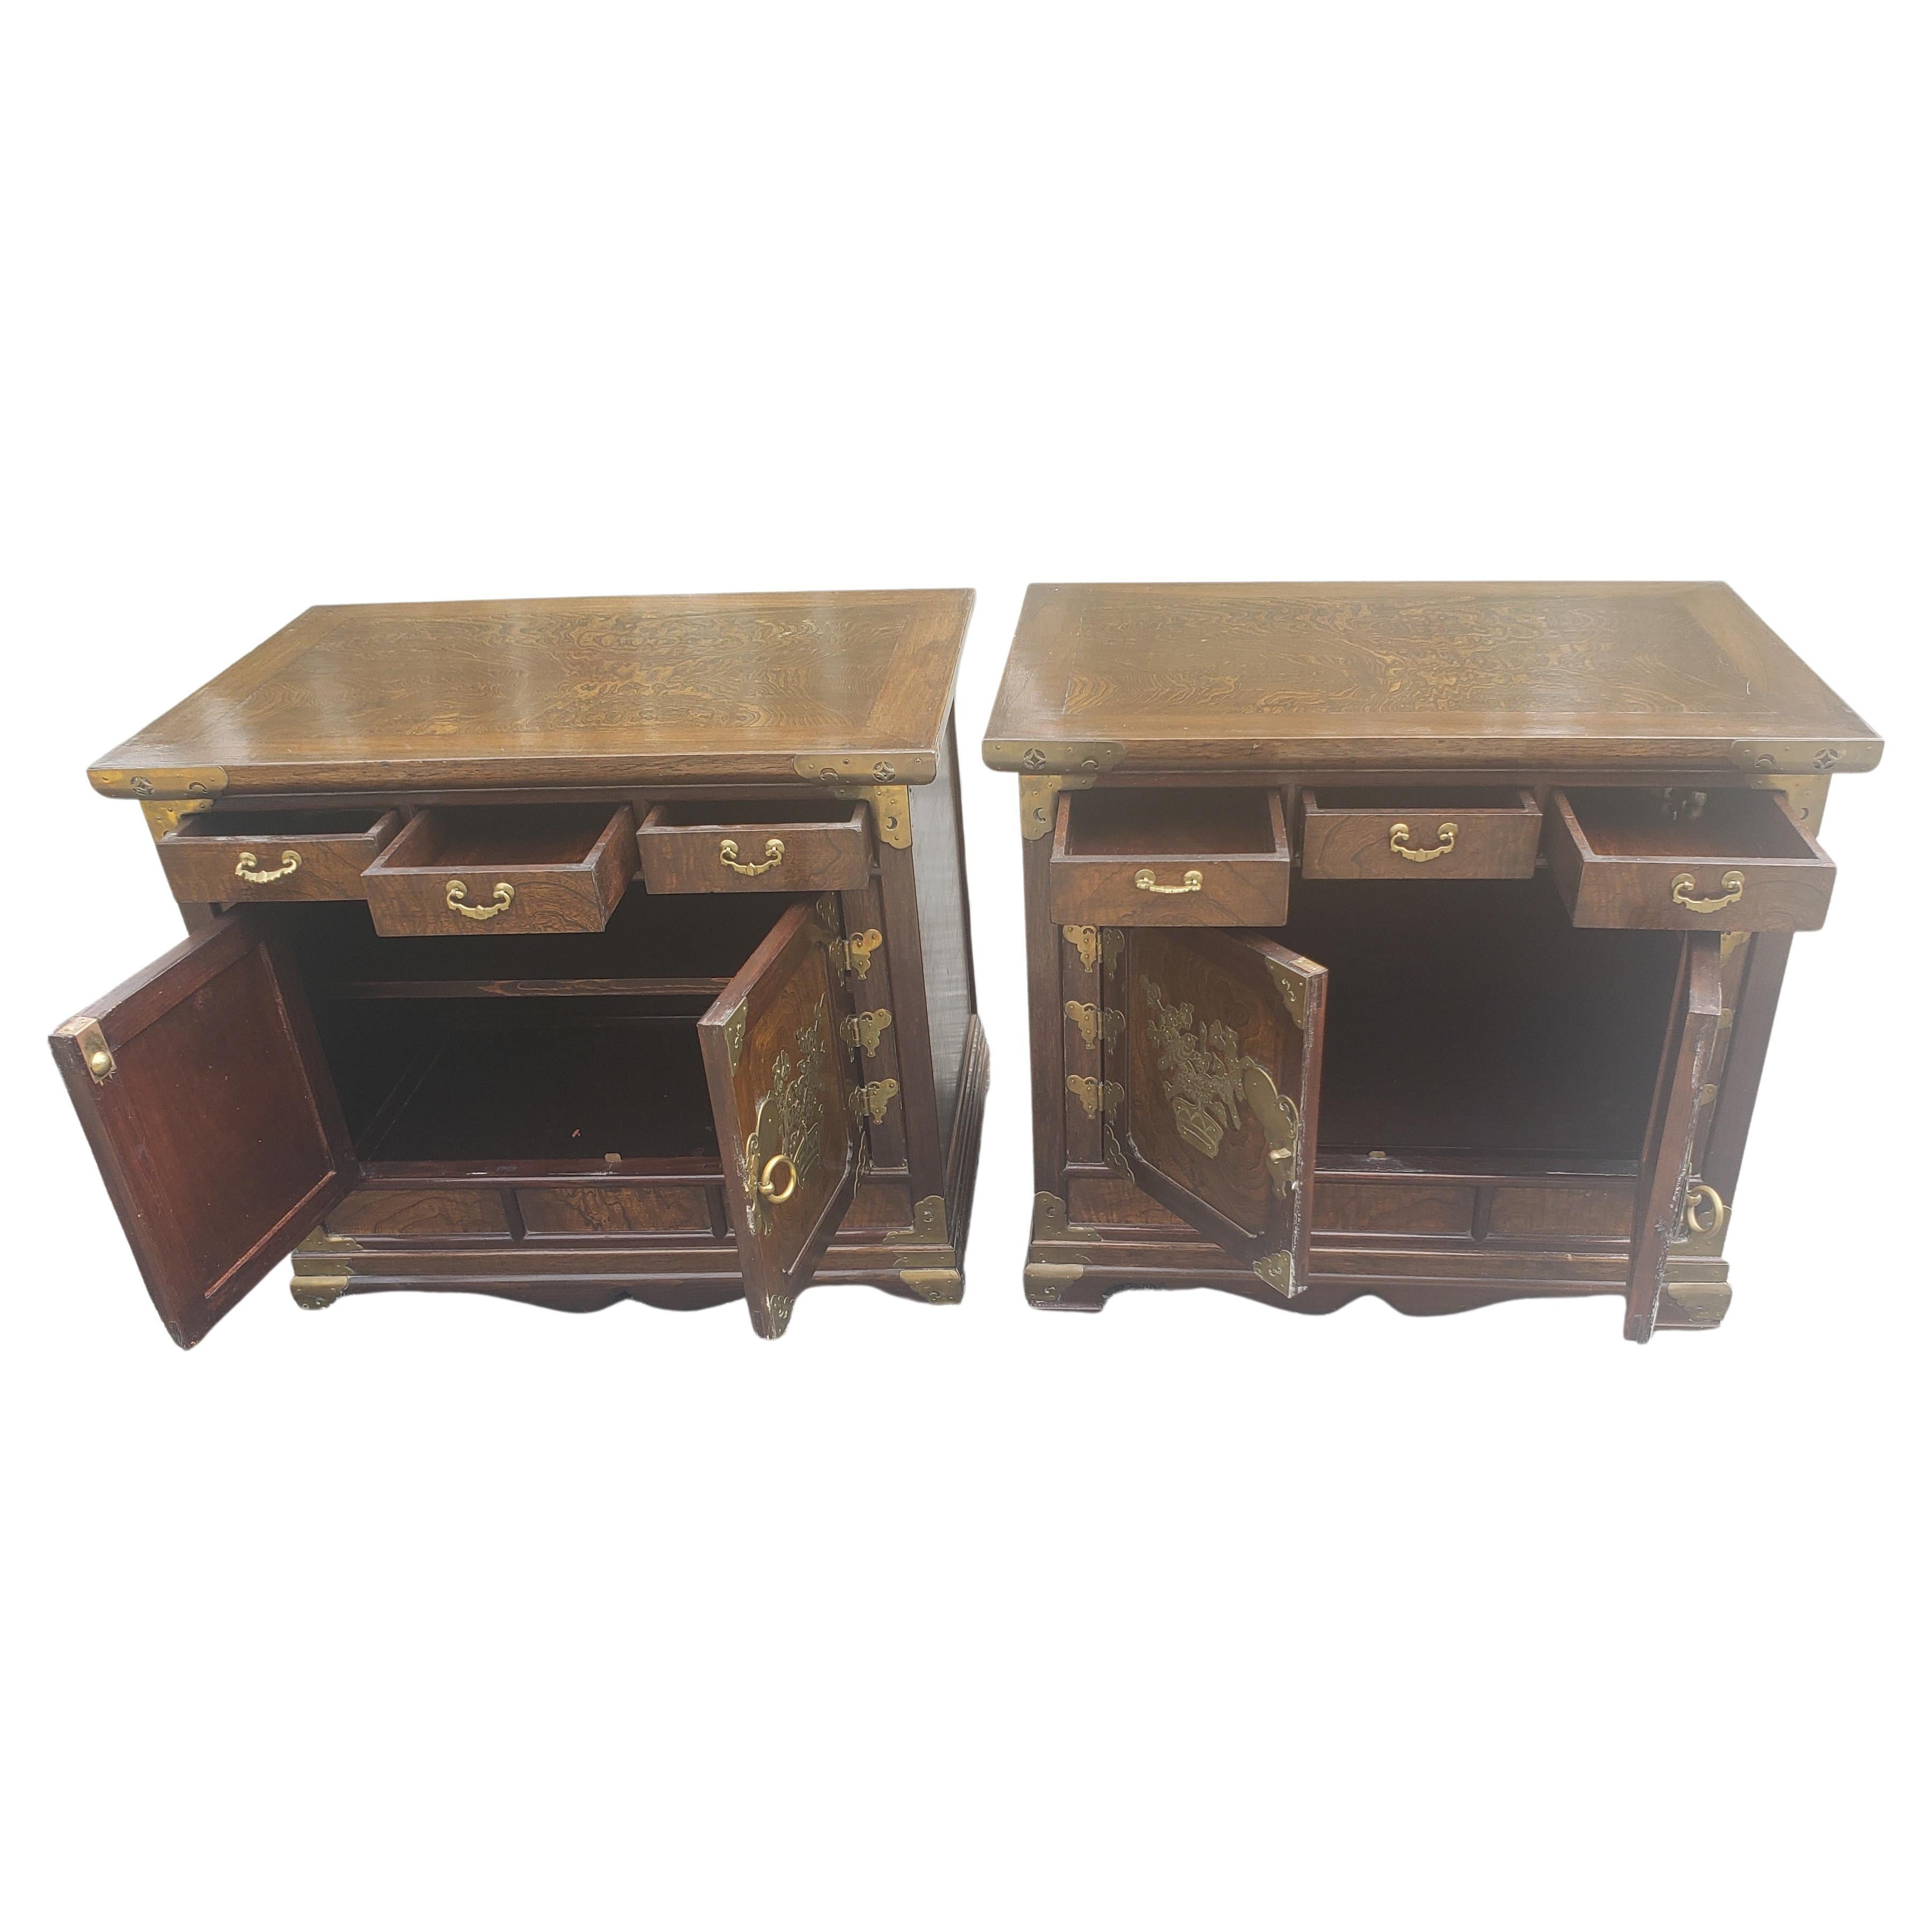 A beautiful and versatile pair of Asian Tansu side tables cabinets, bedside table in very good vintage condition. Banded Burlwood top. Cabinet has a shelf. Original finish in good condition.
Measures 27.25